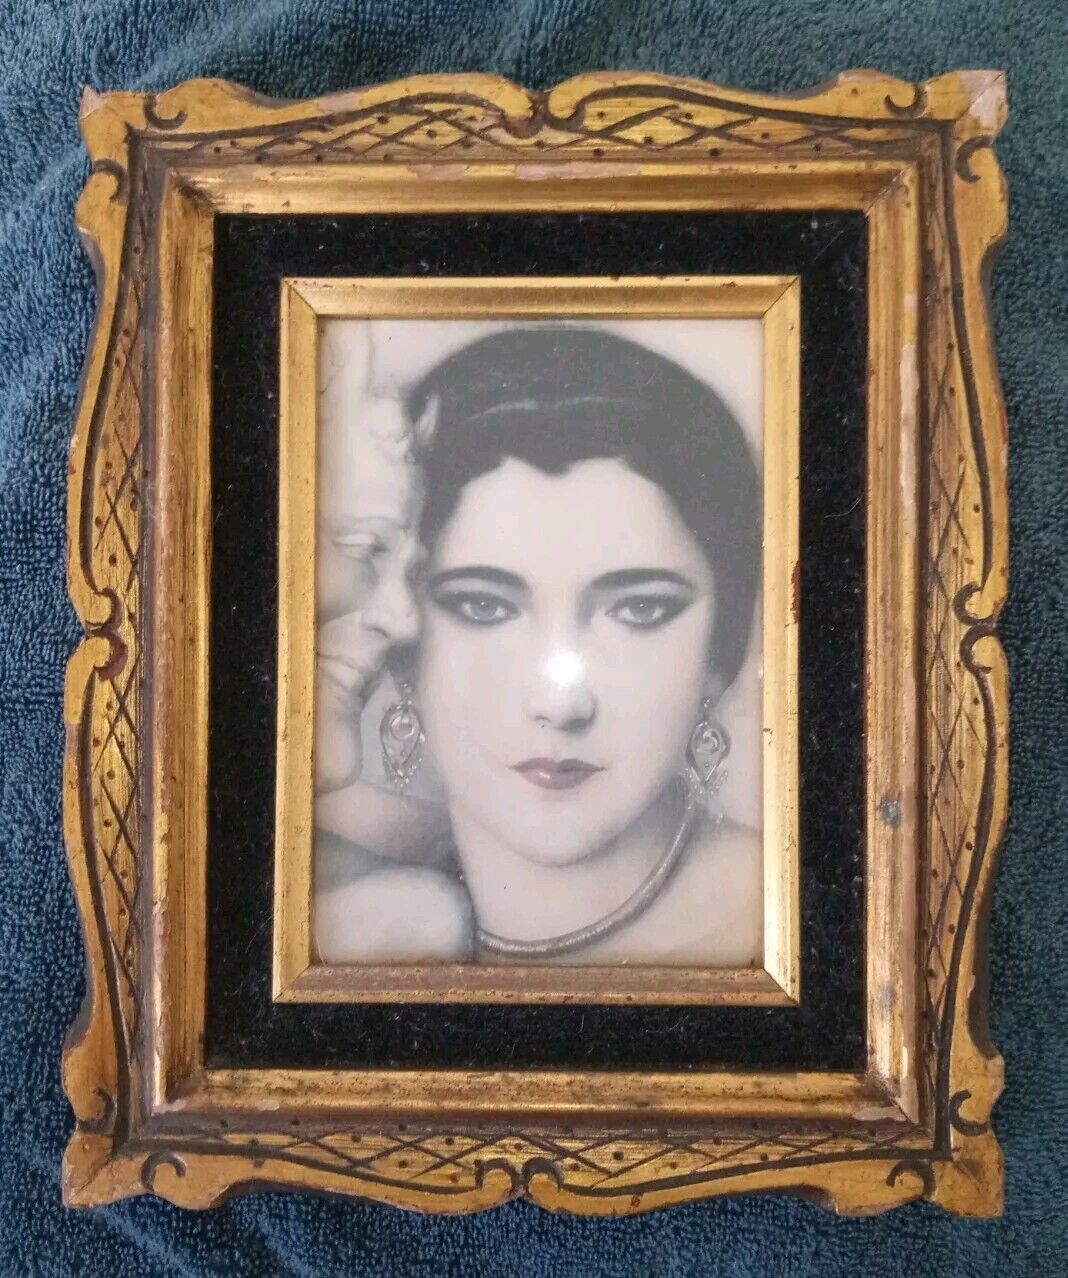 Vintage Women With Imp Whispering In Her Ear Framed Picture